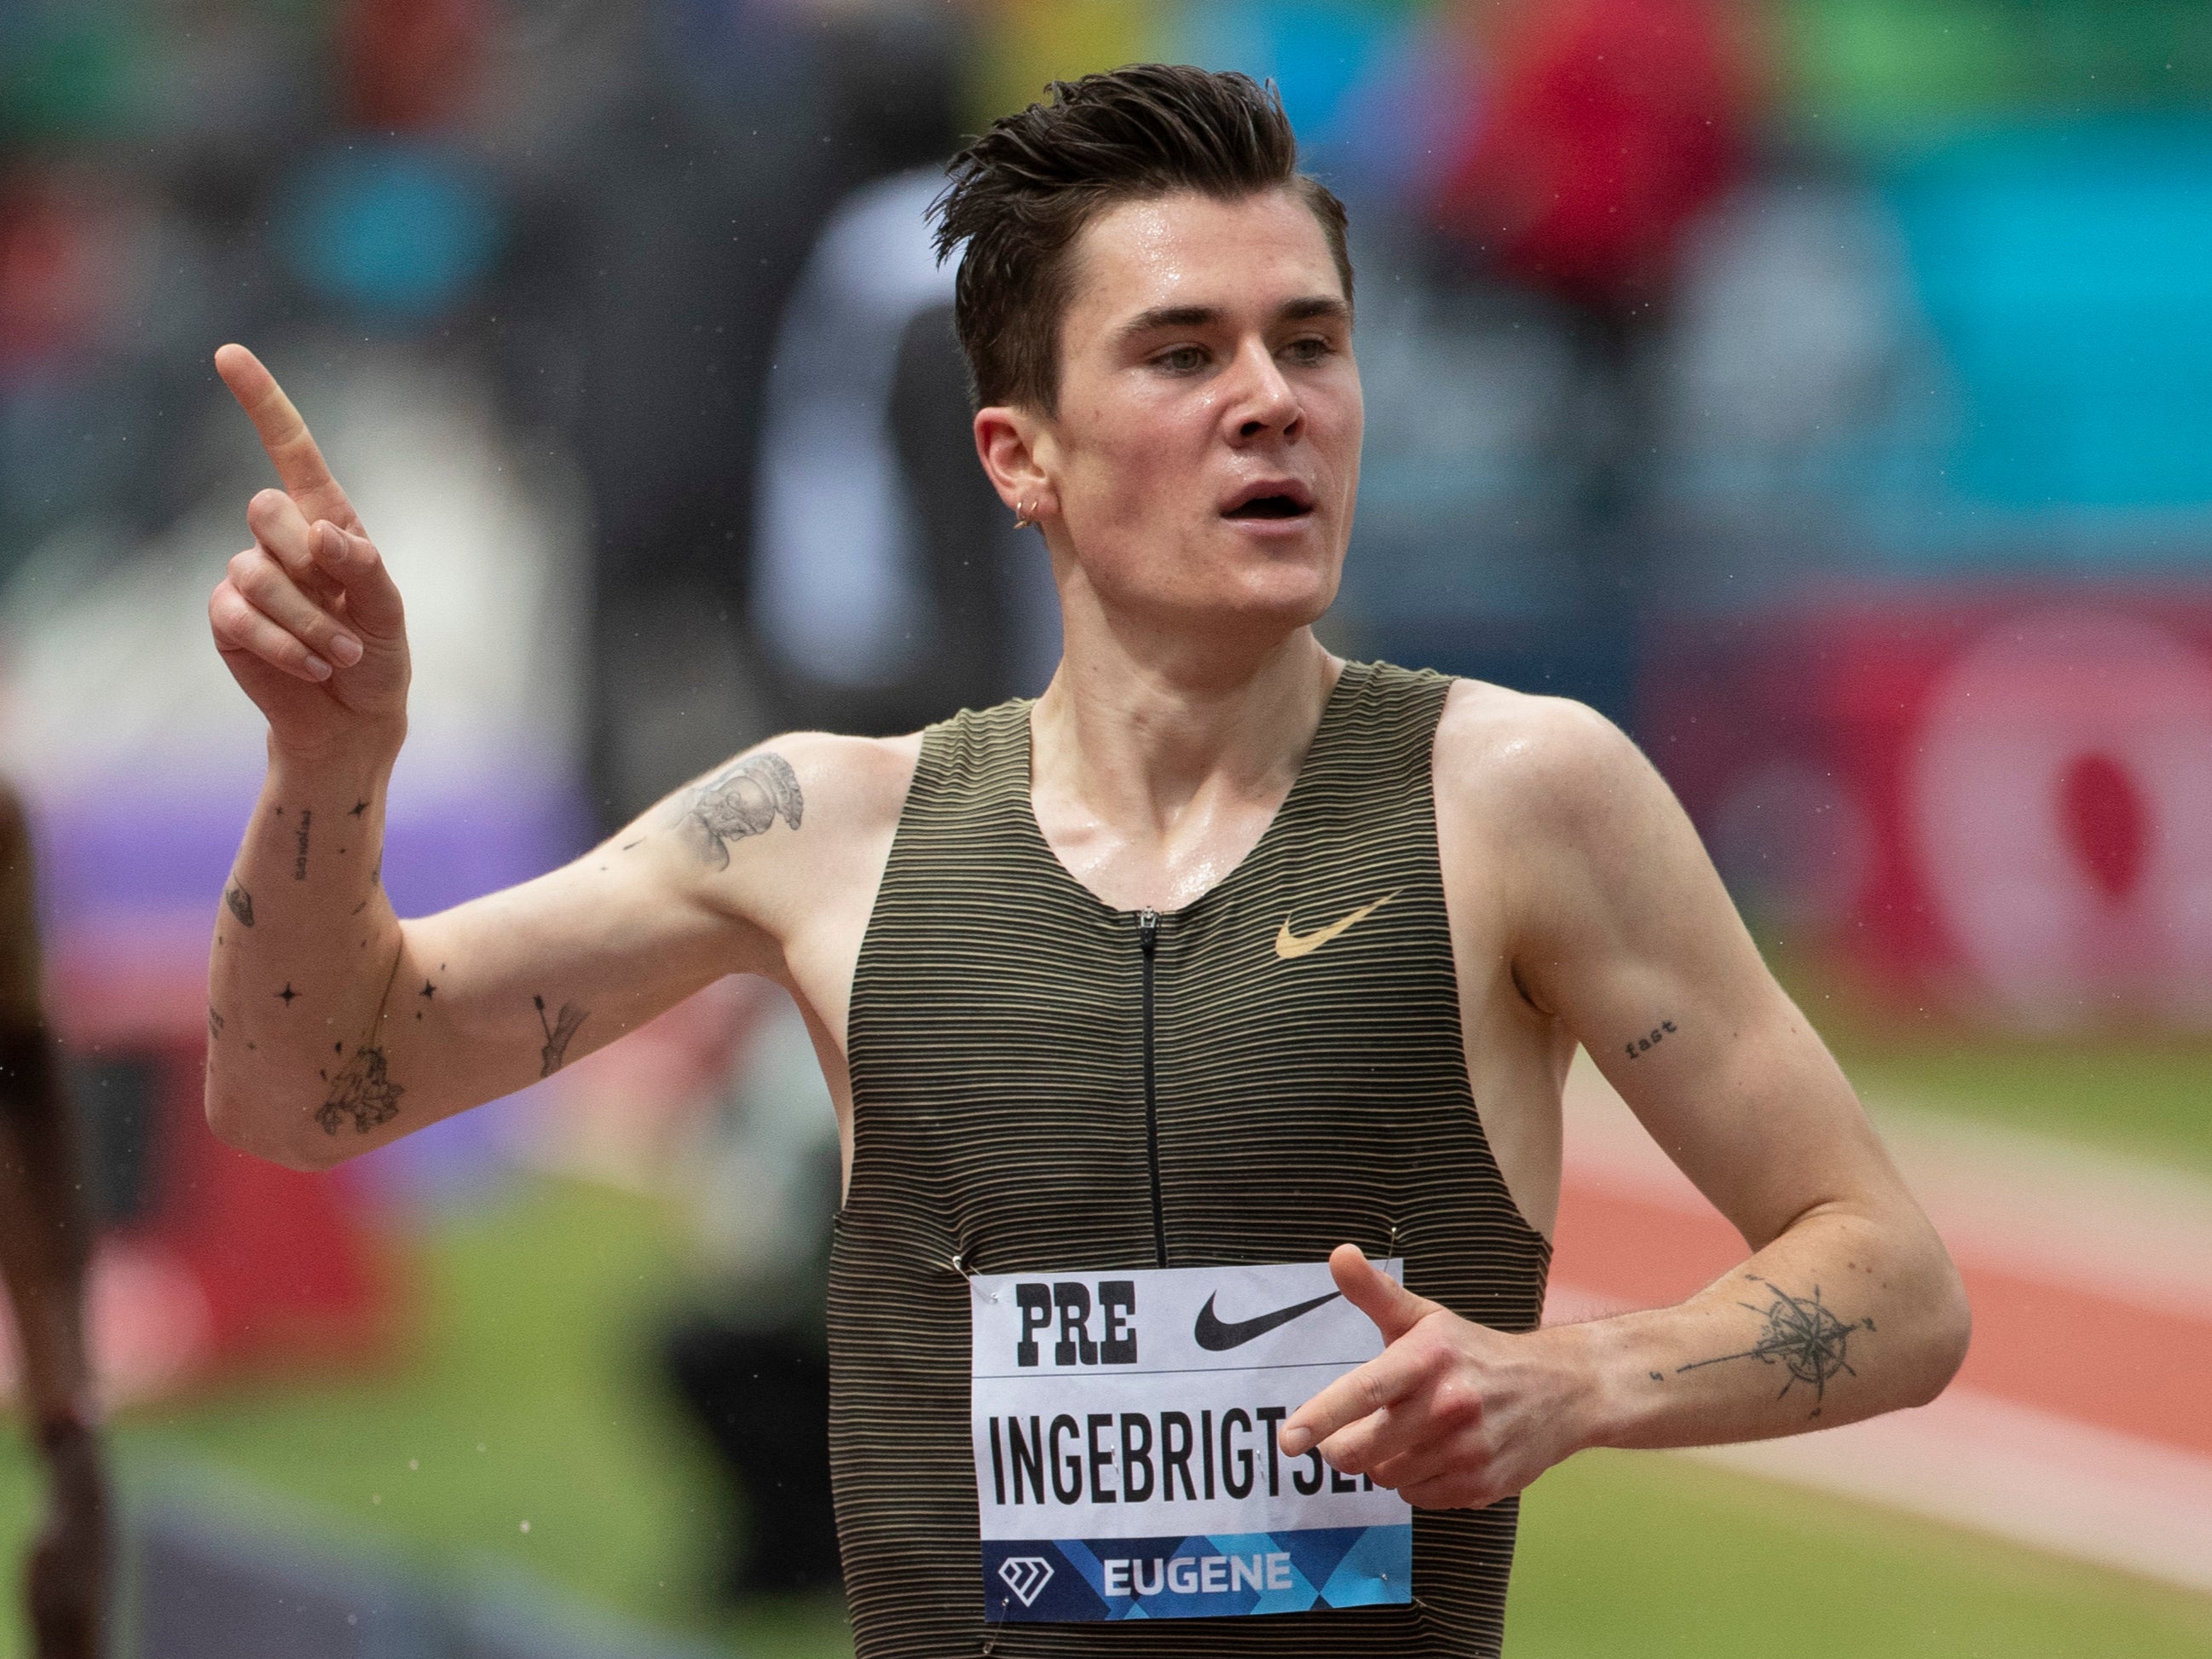 Jakob Ingebrigtsen will hope to win the Dream Mile at home in Oslo